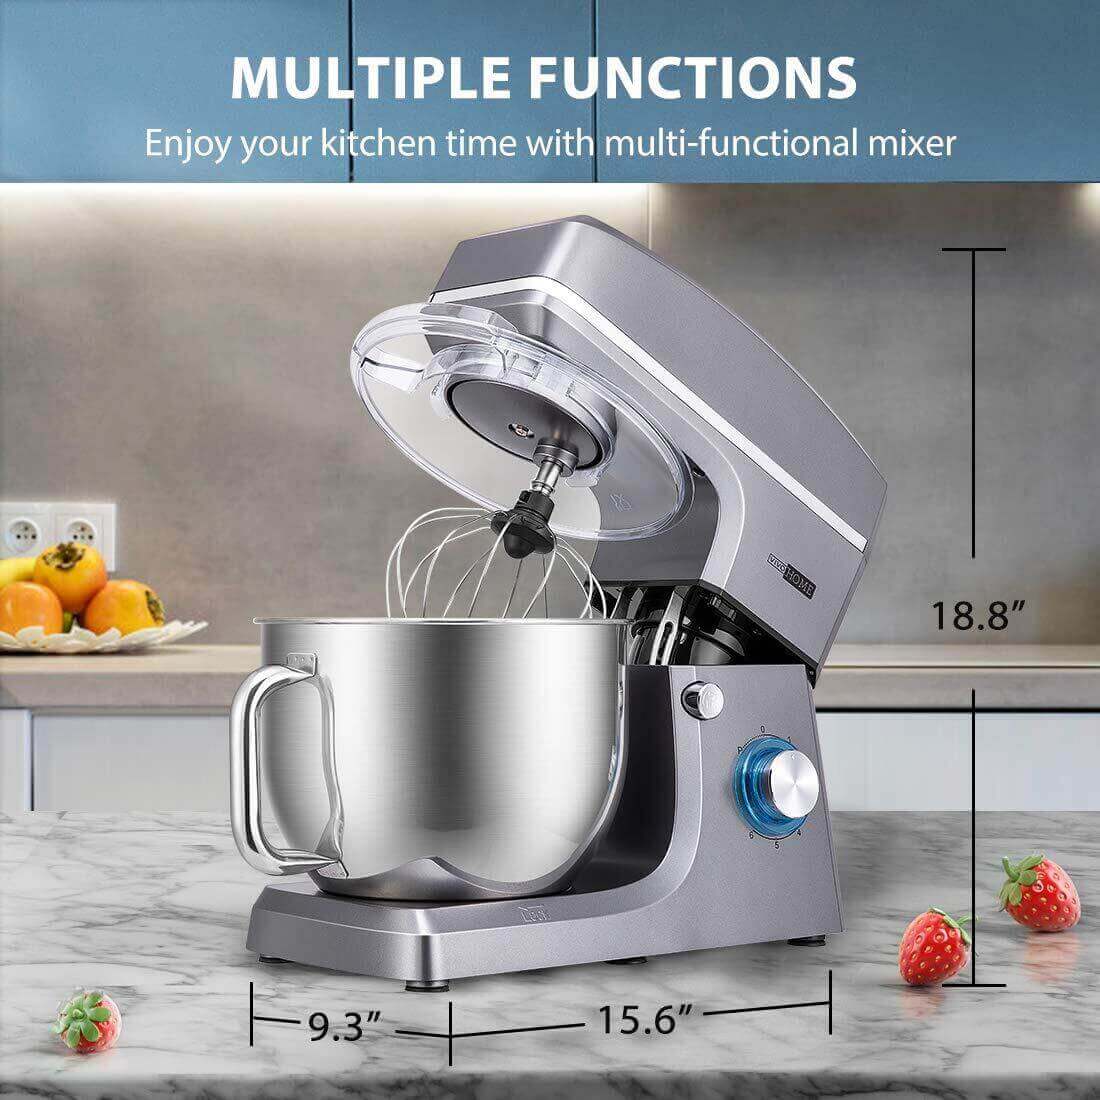 VIVOHOME 7.5 Quart Stand Mixer, 660W 6-Speed Tilt-Head Kitchen Electric Food Mixer with Beater, Dough Hook and Wire Whip, Iron Gray